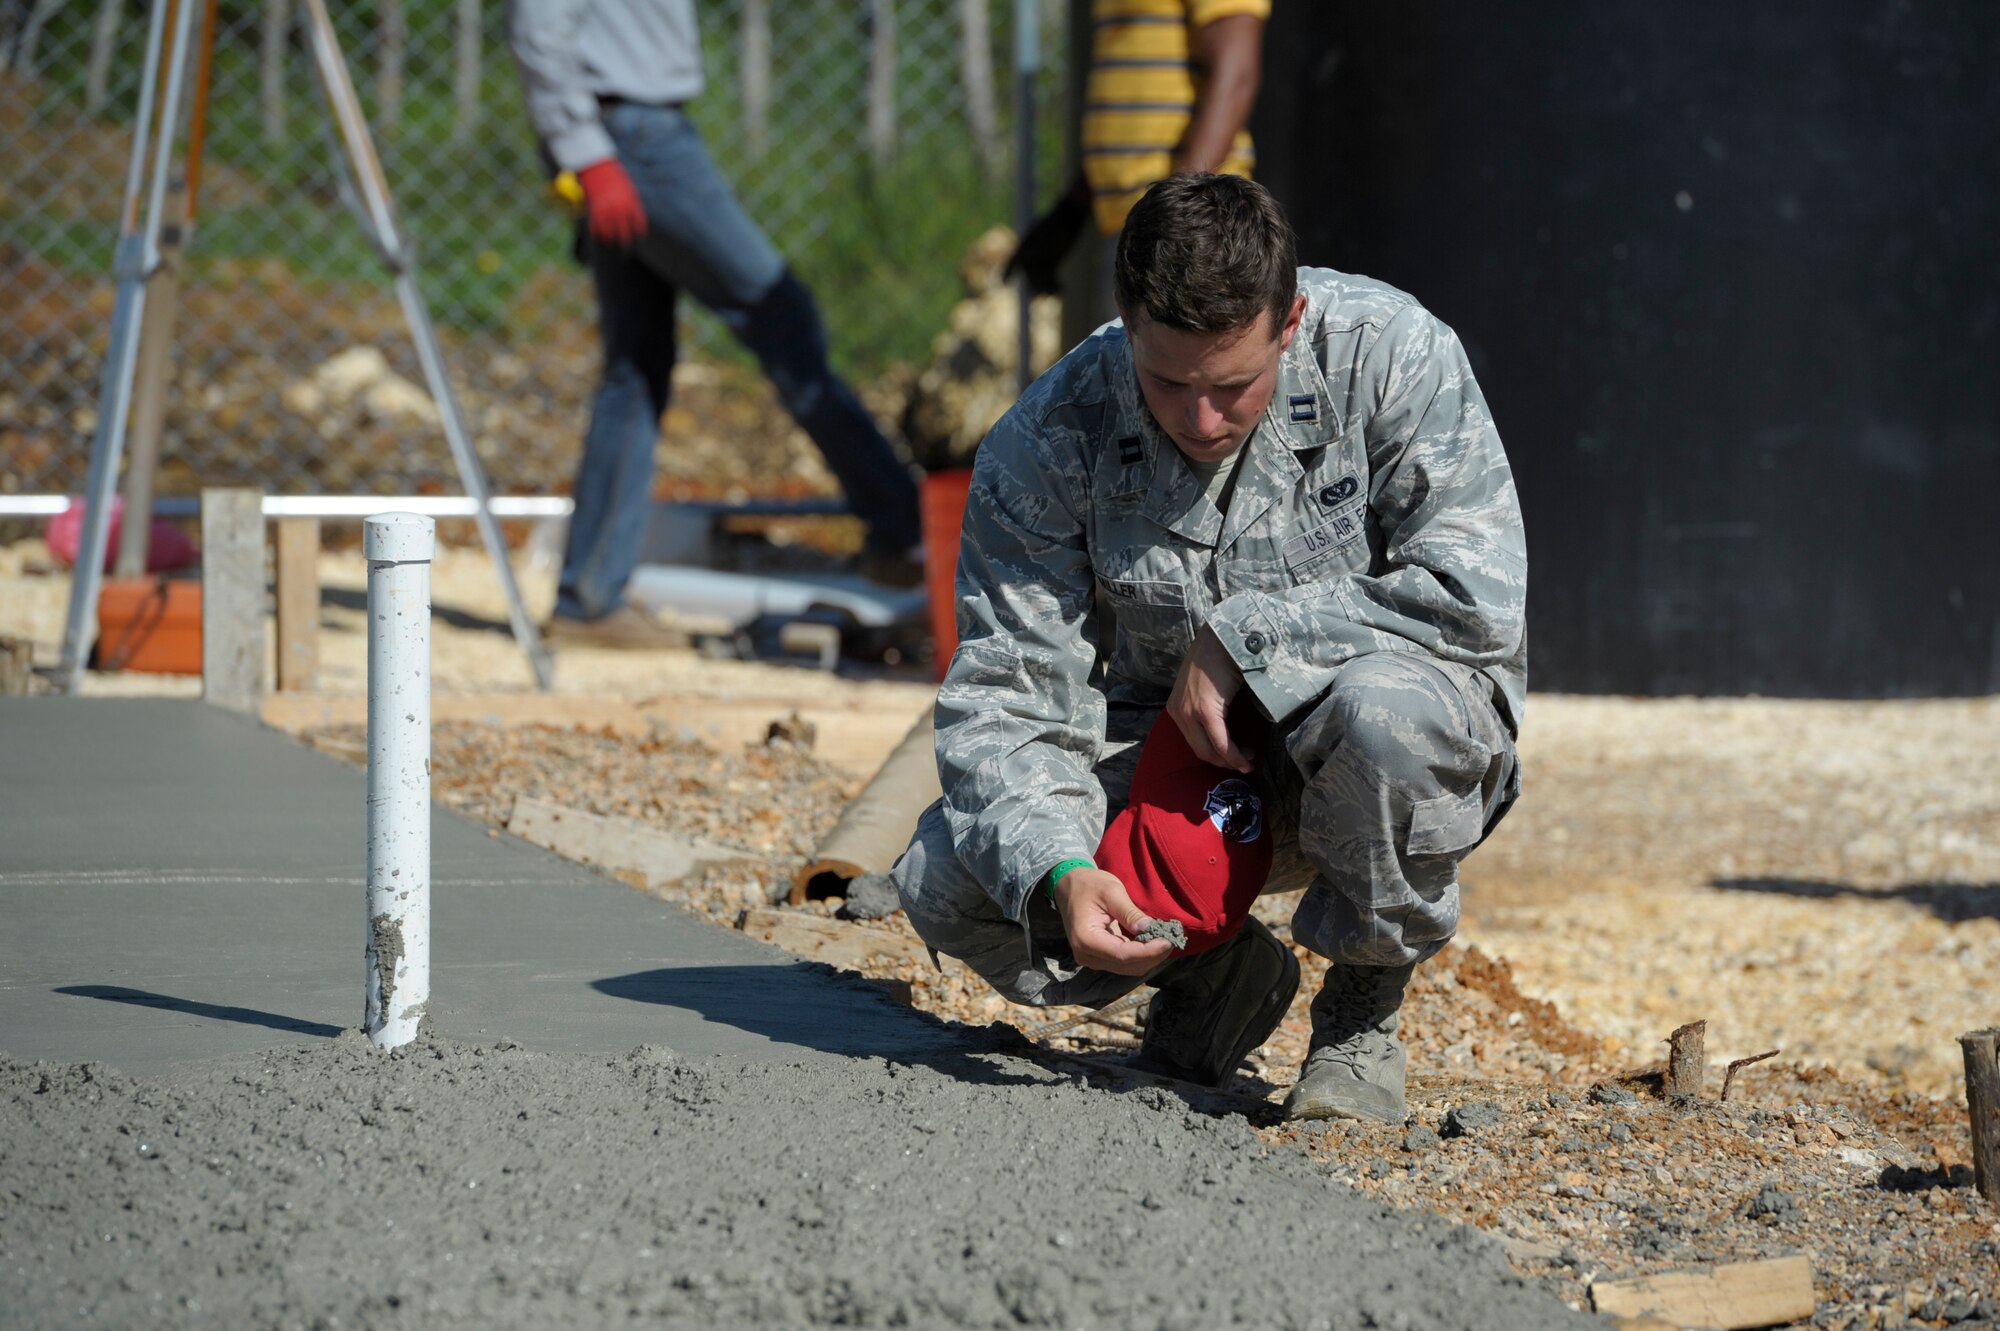 Capt. Joseph Miller, 820th RED HORSE Squadron, quality control officer in charge, checks the consistency of the concrete while local Dominican contractors create a foundation for a new clinic in Copeyito, Dominican Republic as part of Exercise NEW HORIZONS 2016, Apr. 8, 2016. Members of the 820th RED HORSE Squadron, from Nellis Air Force Base, Nevada, provide Quality Control and Quality Assurance during the foundation preparation. (U.S. Air Force photo by Master Sgt. Chenzira Mallory/Released)